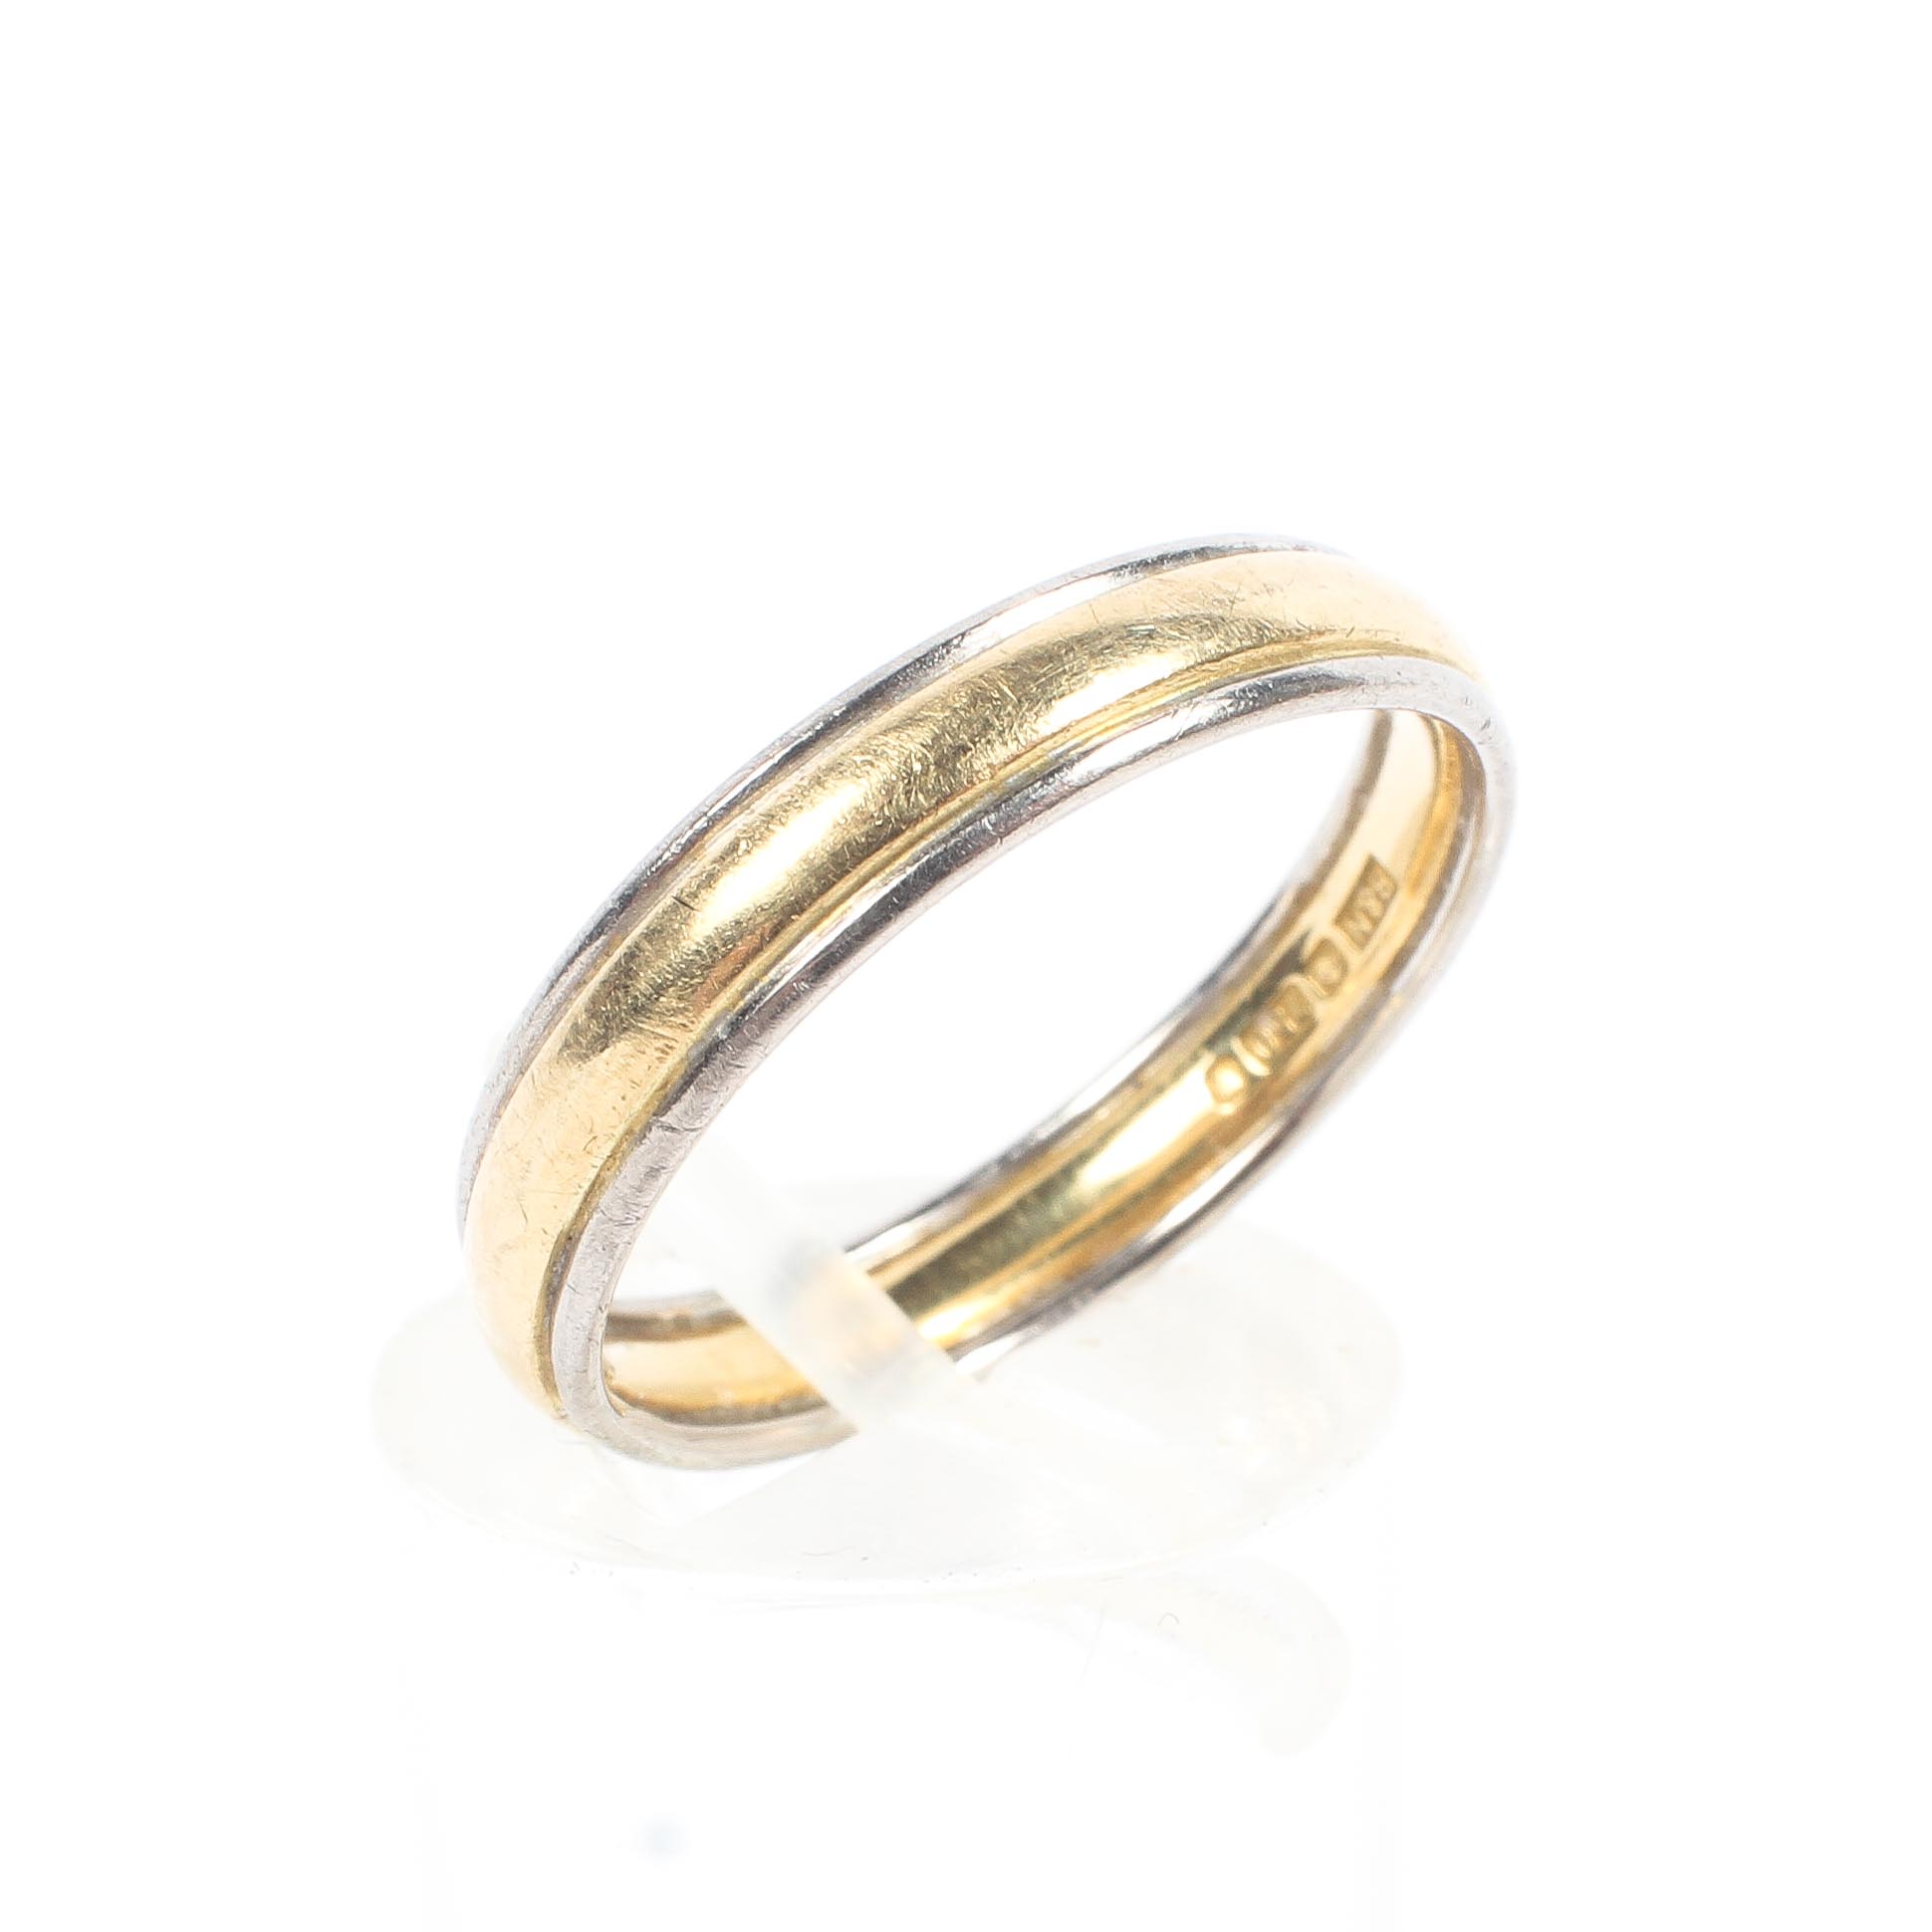 An 18ct gold wedding band. 3.5g. Size N.